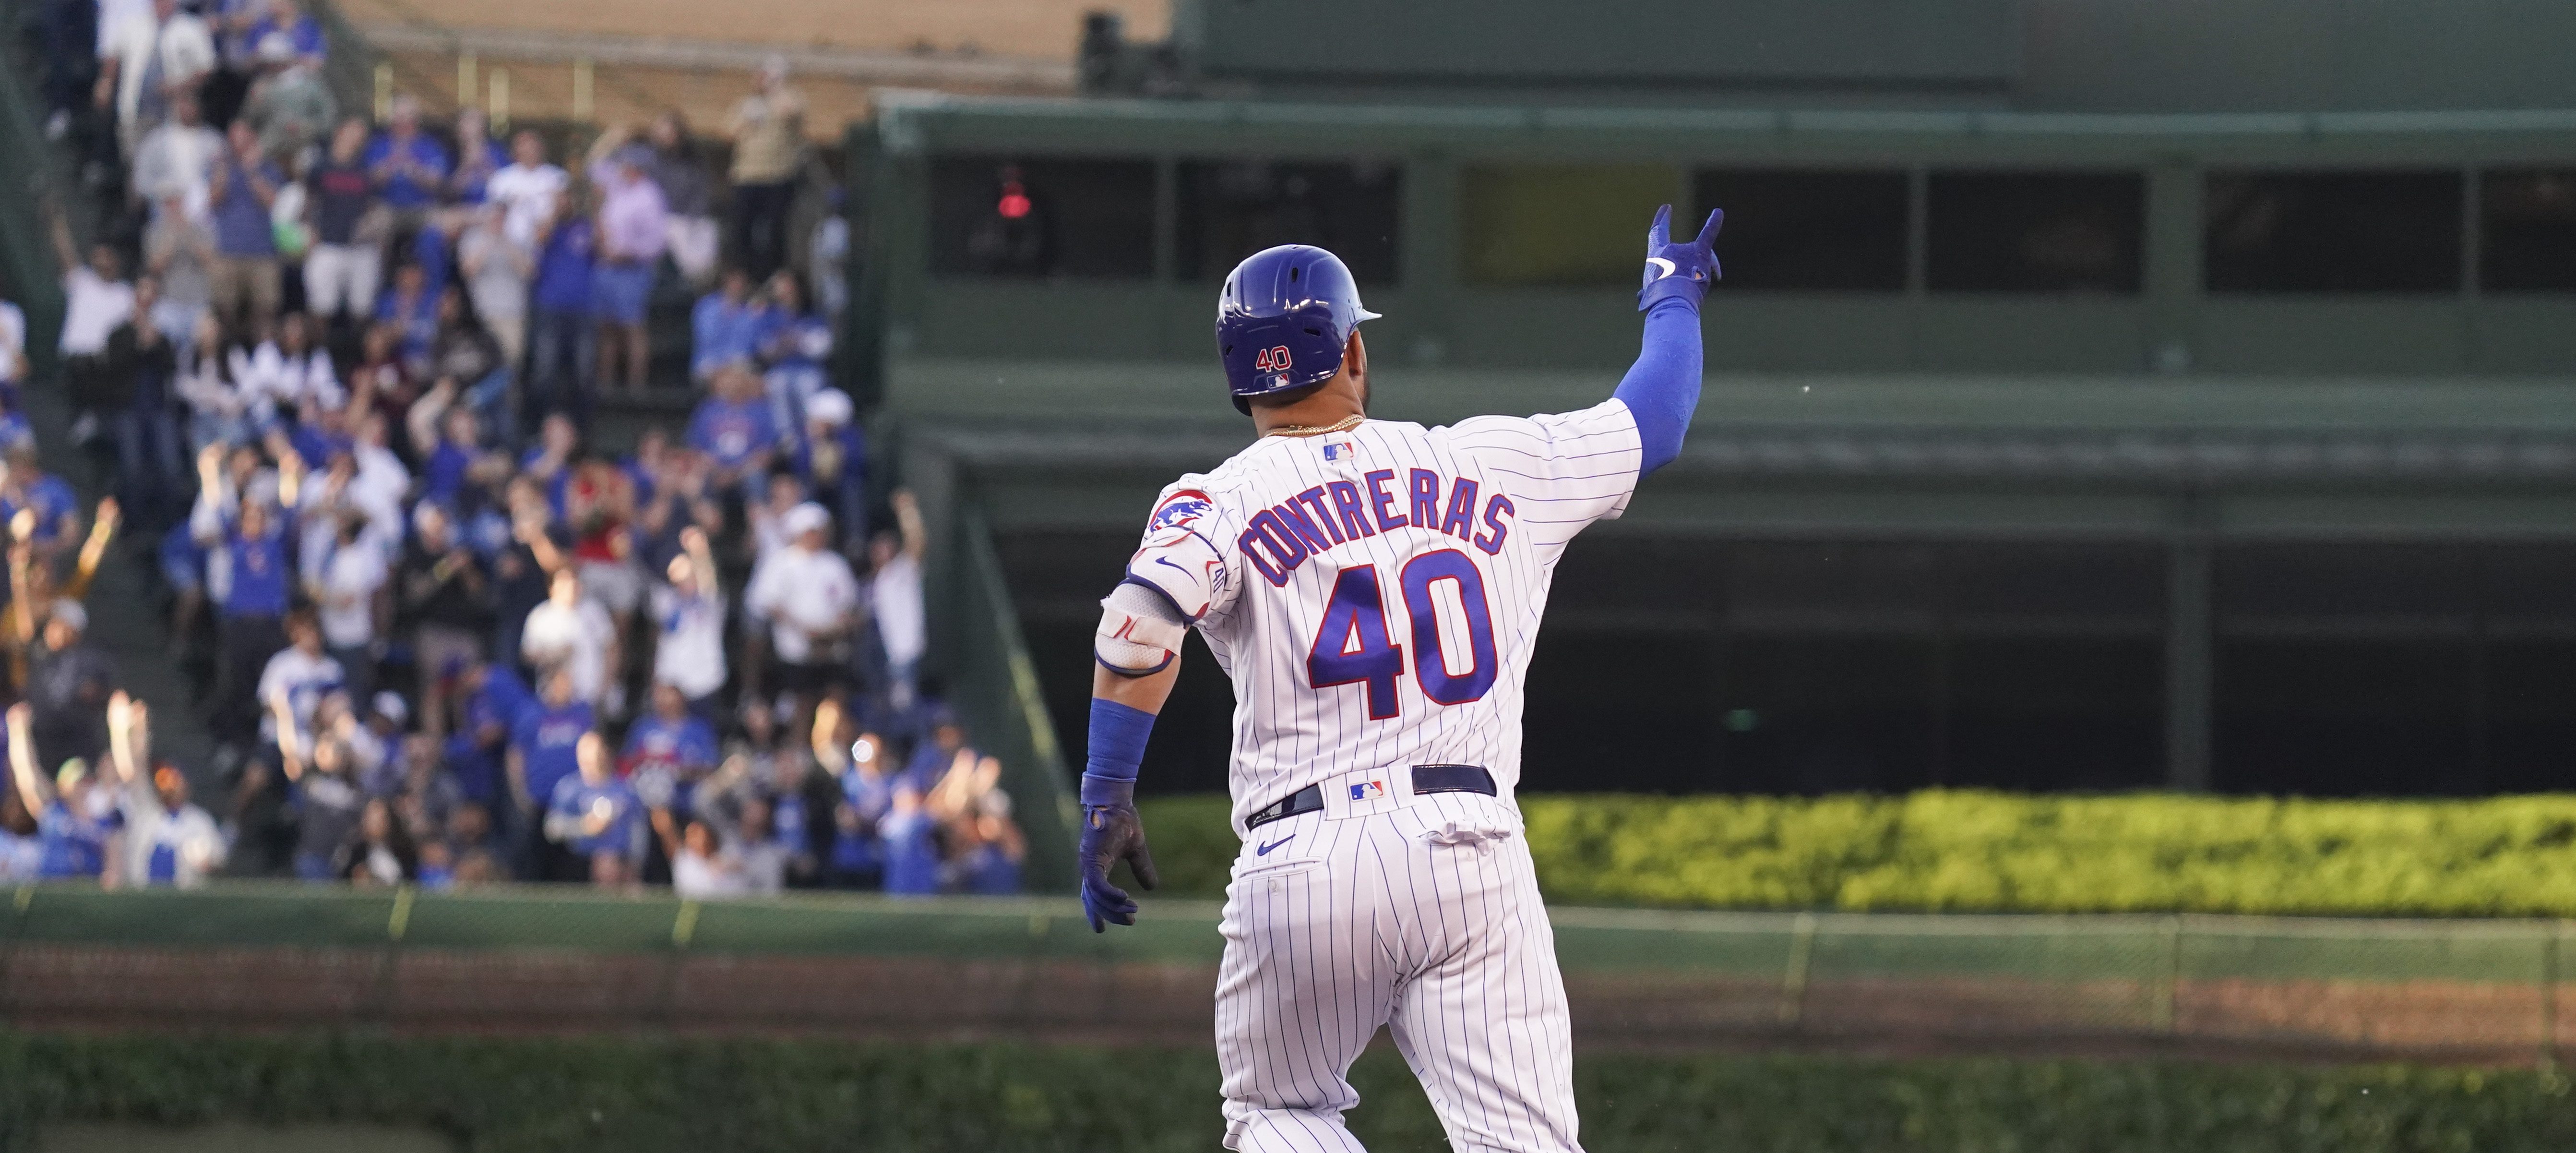 The Chicago Cubs need to trade Willson Contreras right now